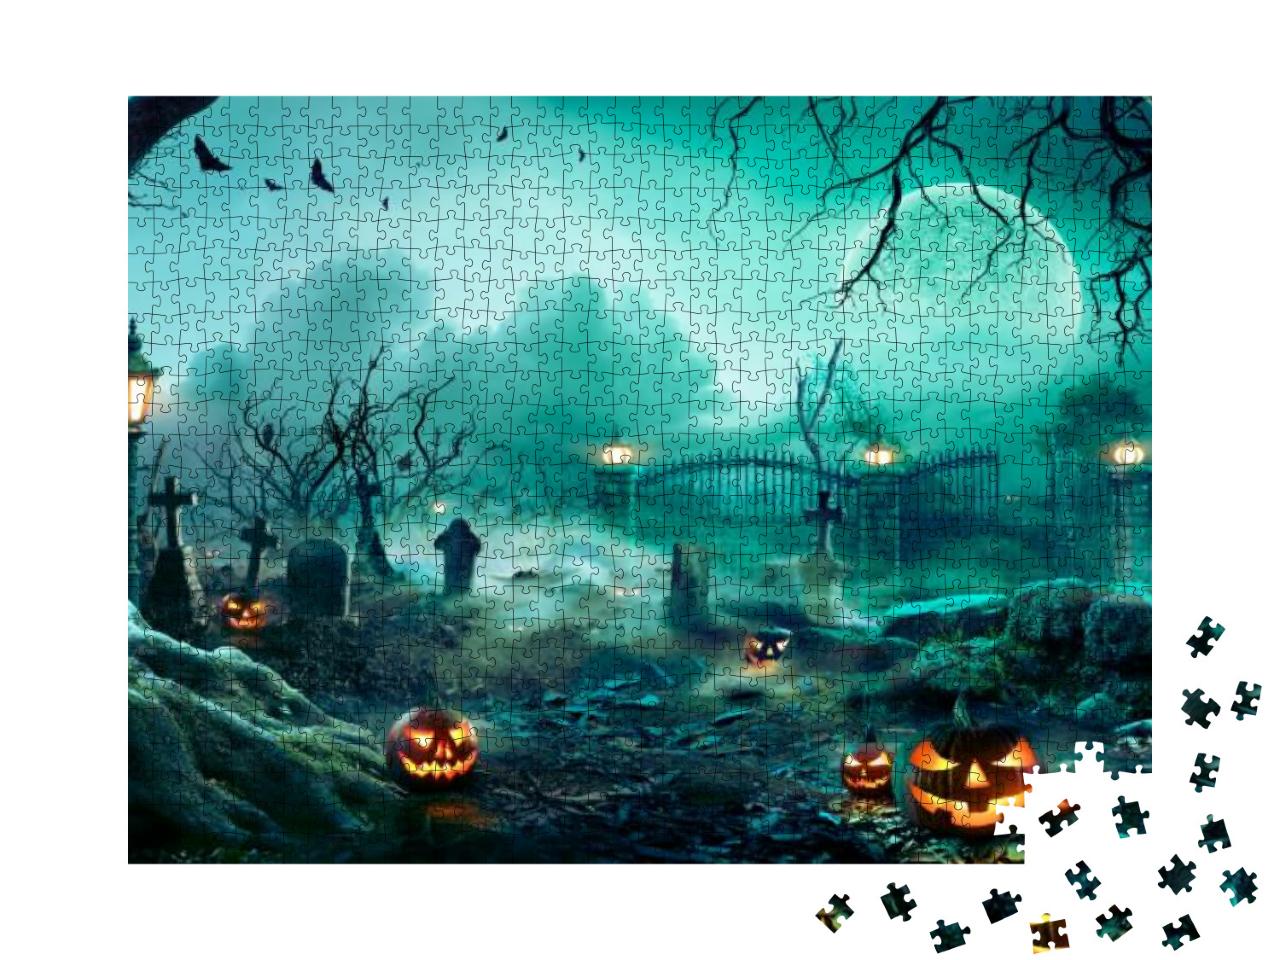 Pumpkins in Graveyard in the Spooky Night - Halloween Bac... Jigsaw Puzzle with 1000 pieces